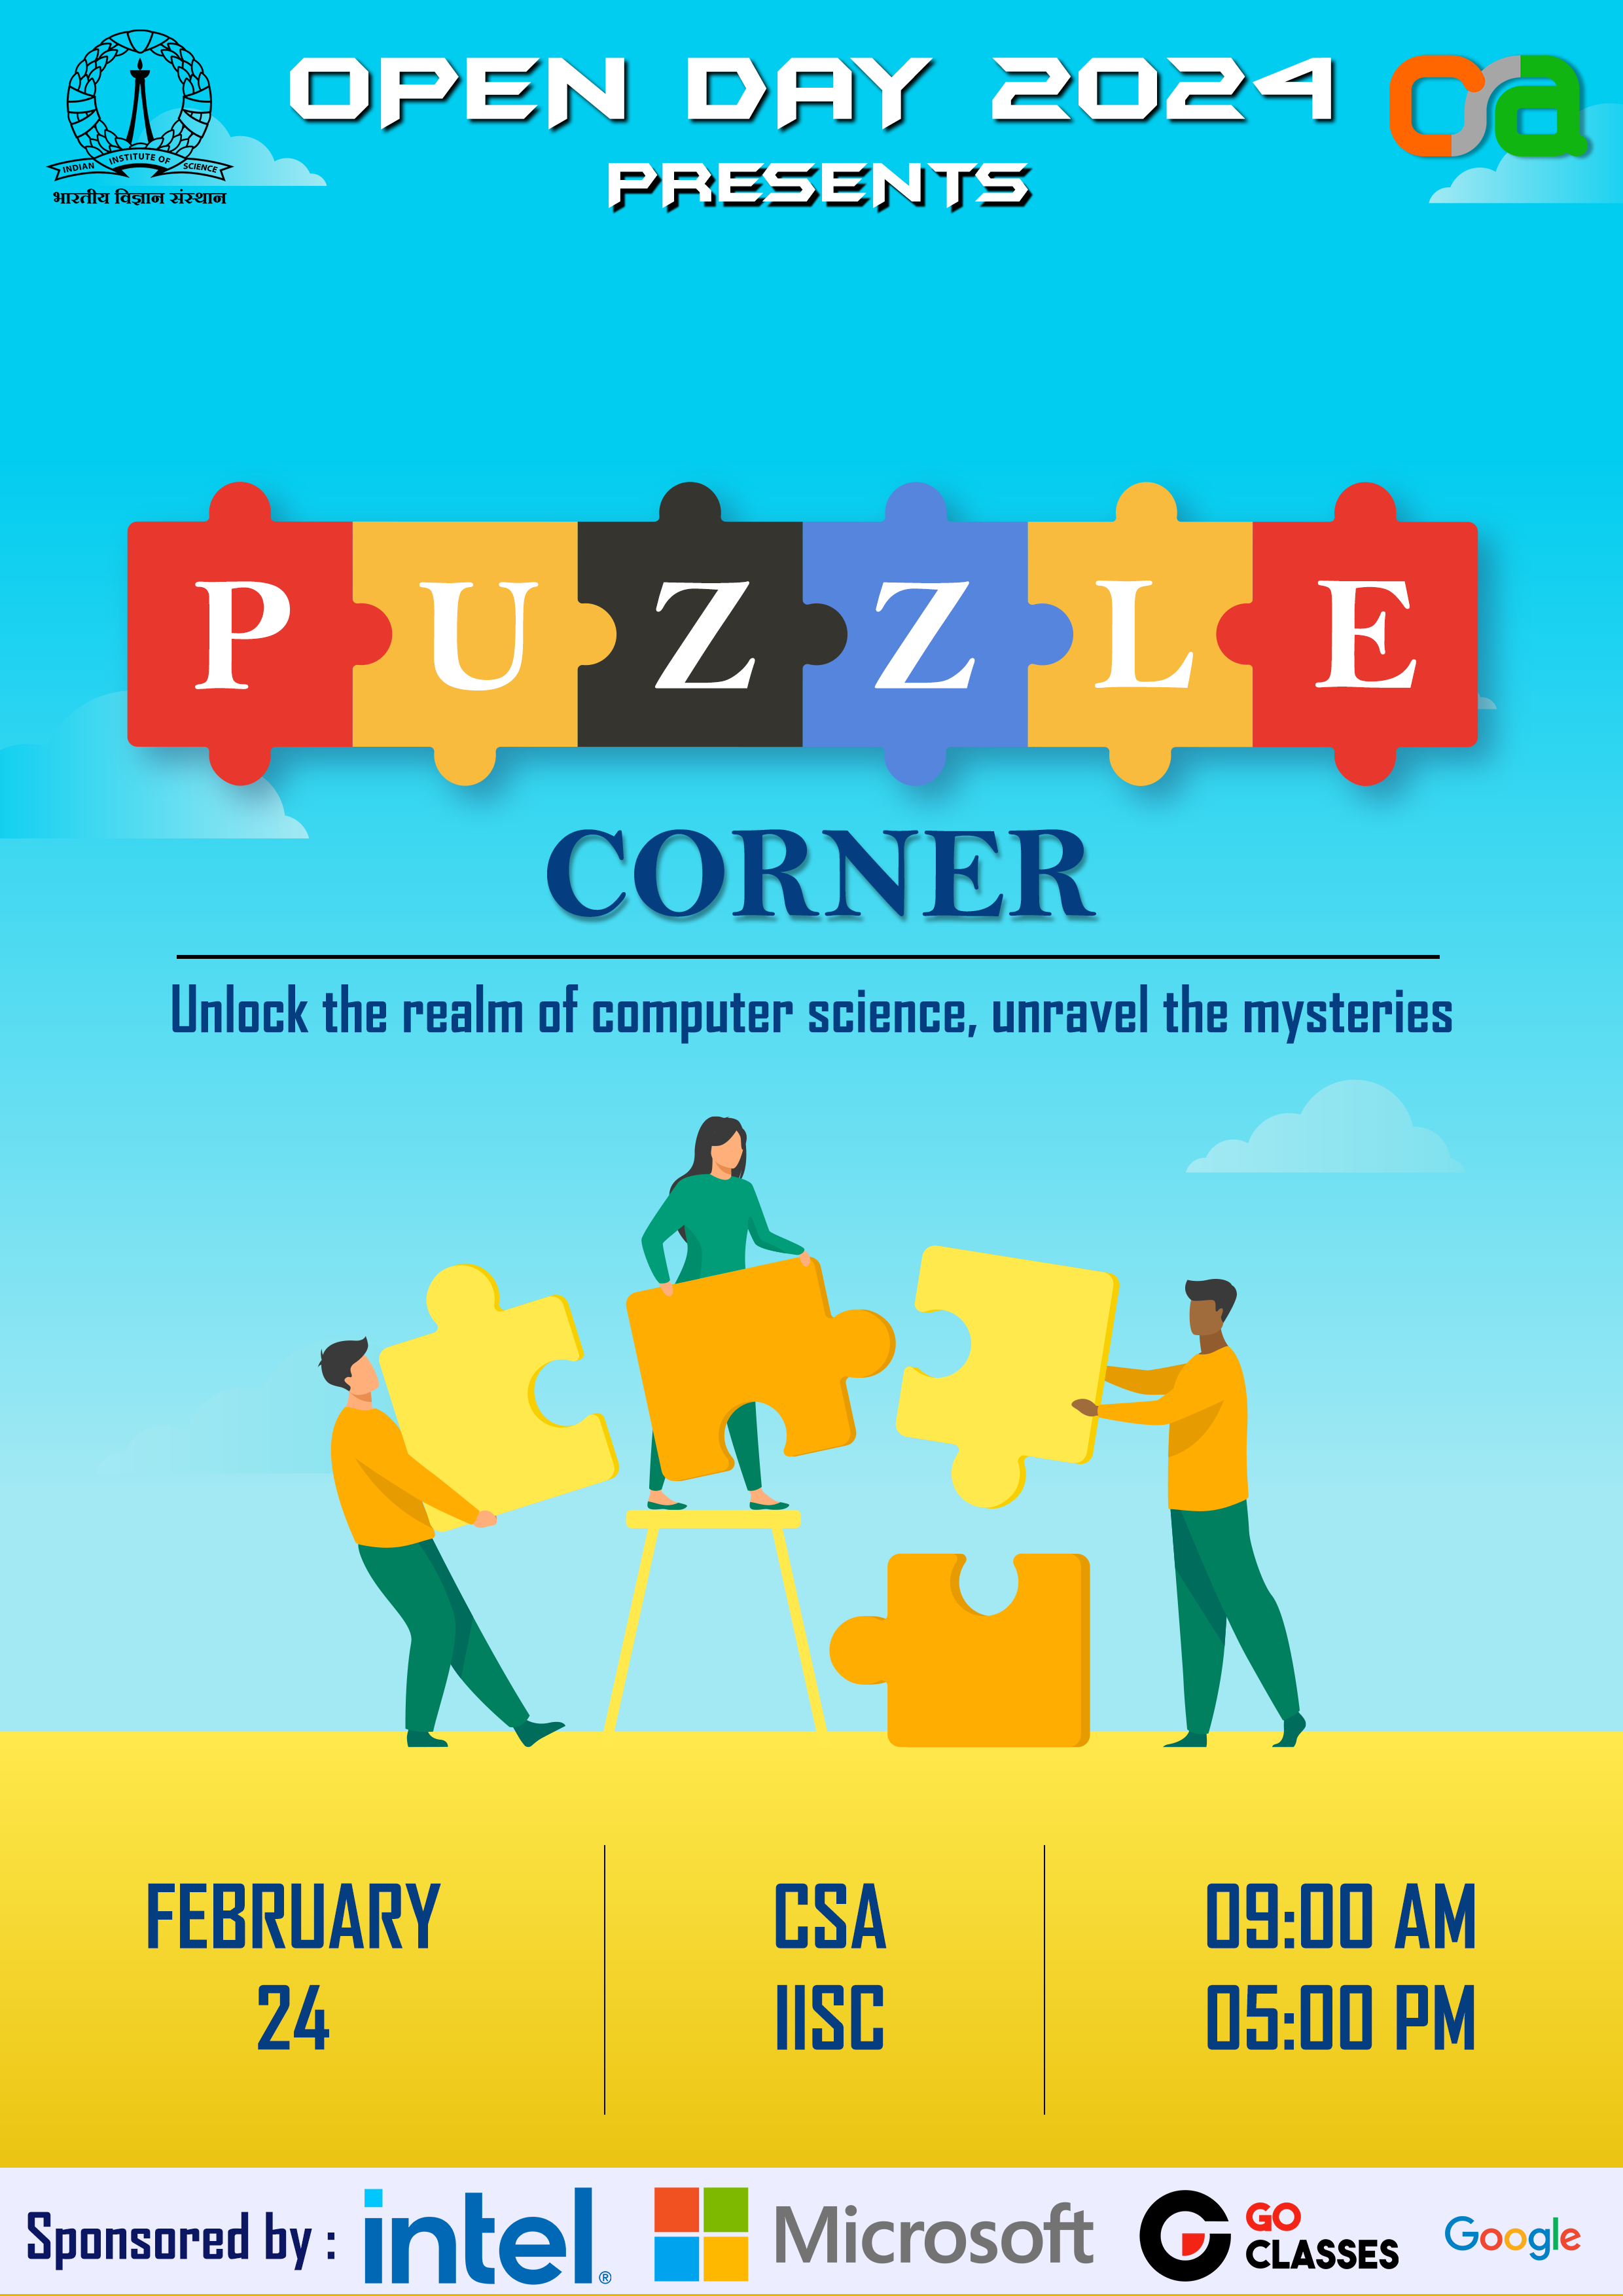 images/PuzzleCorner.png